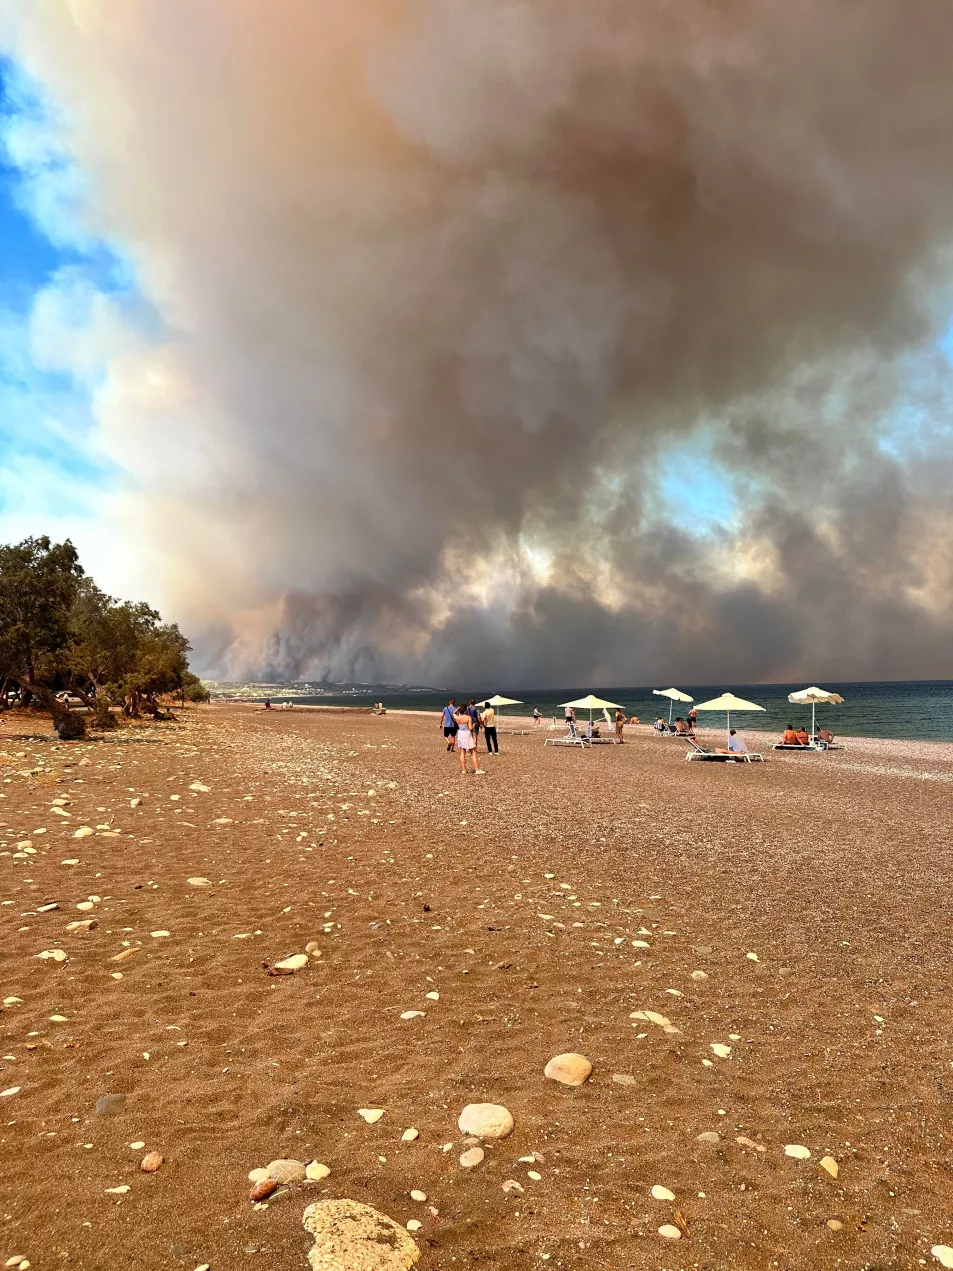 A large plume of smoke over a beach on Rhodes